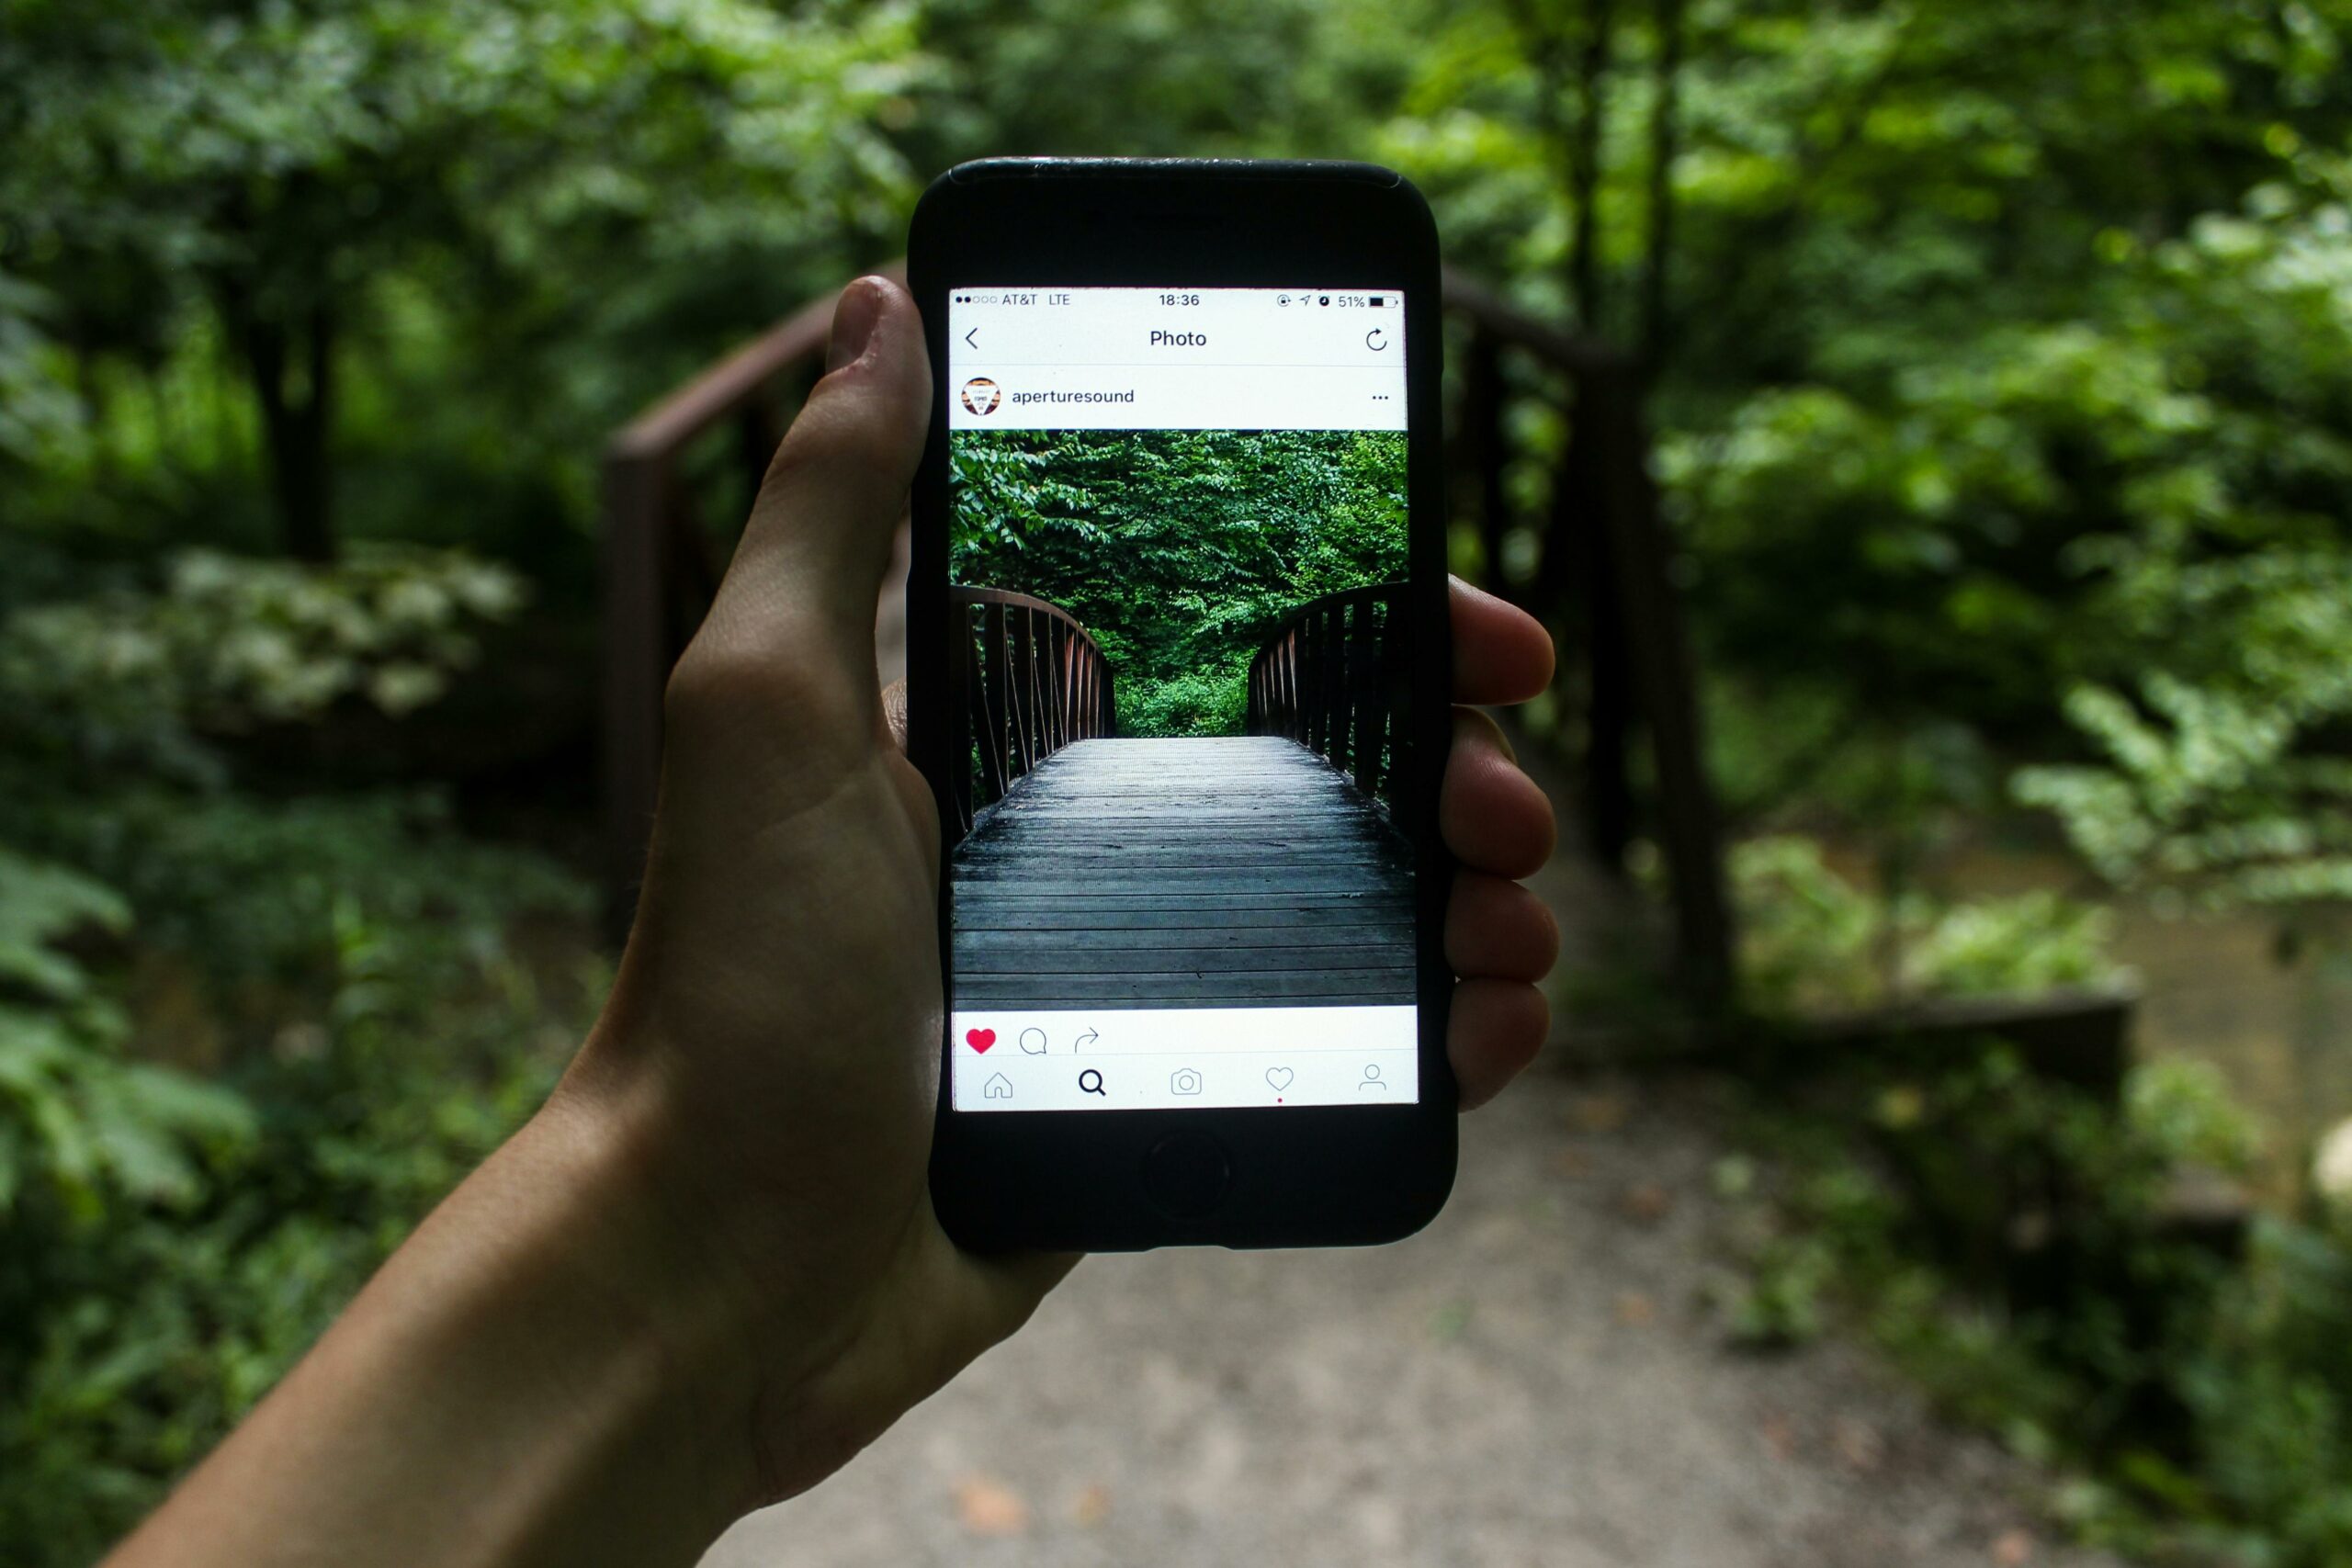 Hand holding a phone with an Instagram image of a bridge in a forest.